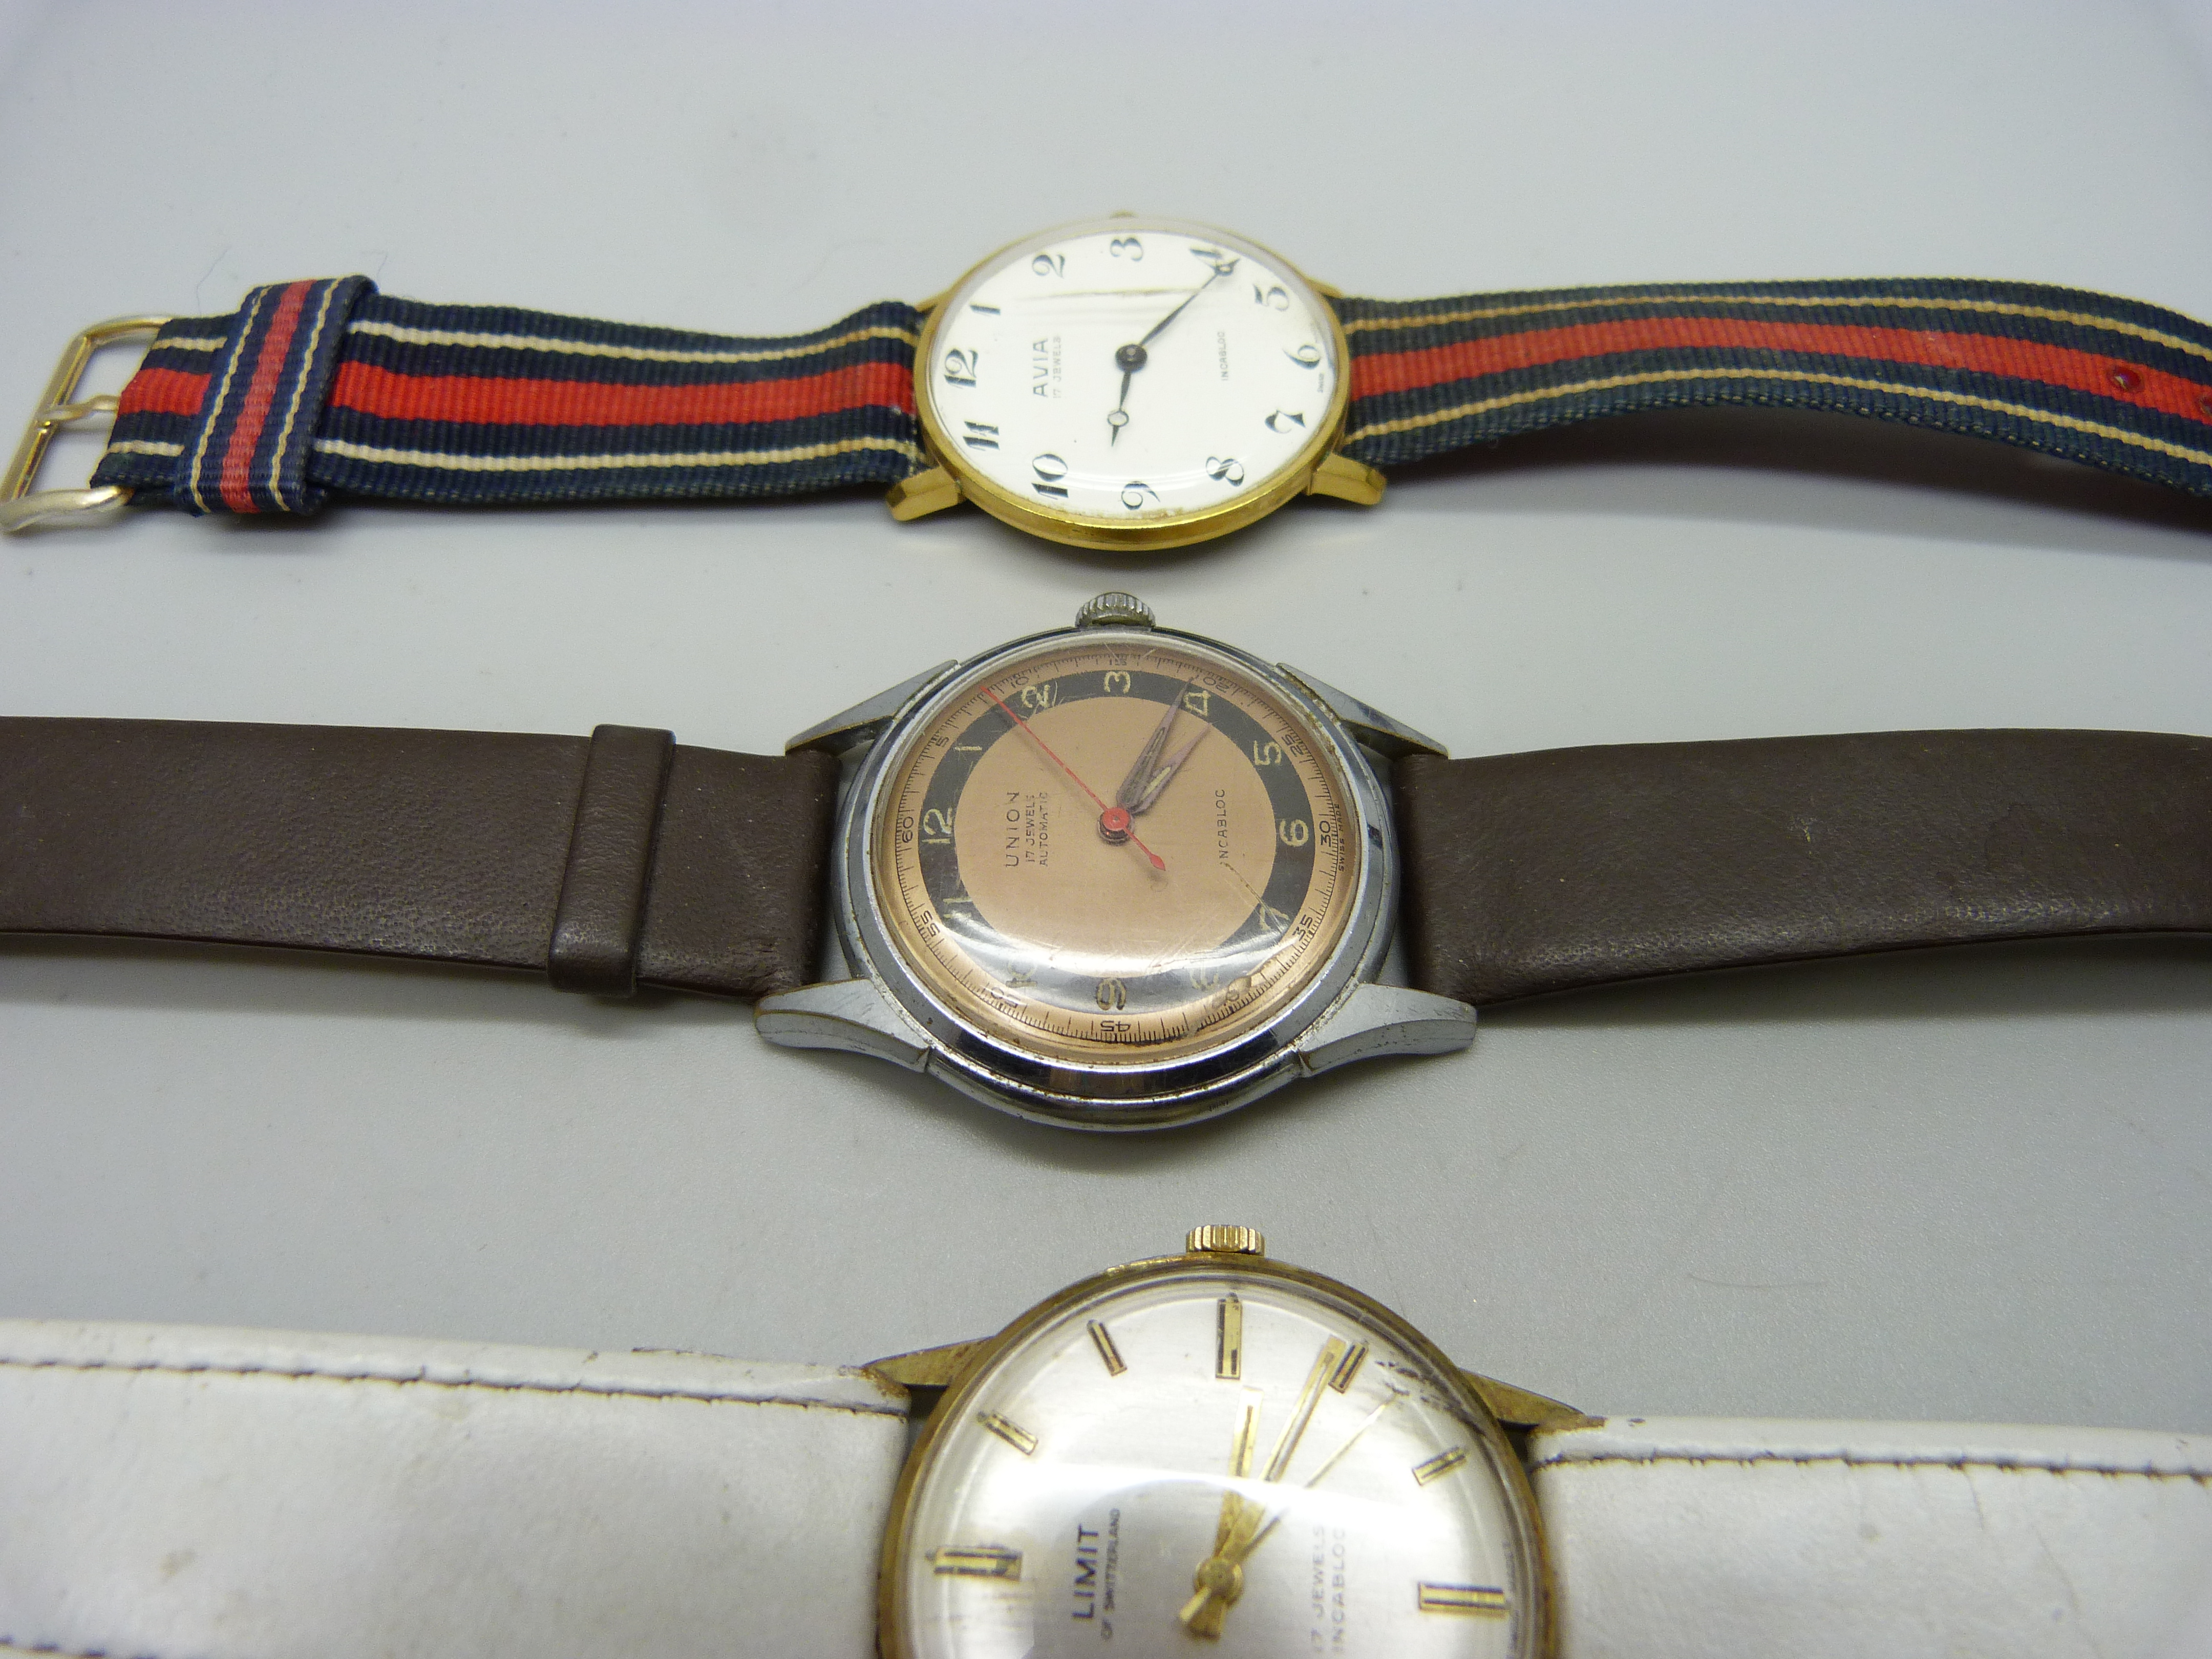 Three gentleman's mechanical wristwatches, Union automatic, Avia and Limit - Image 3 of 5